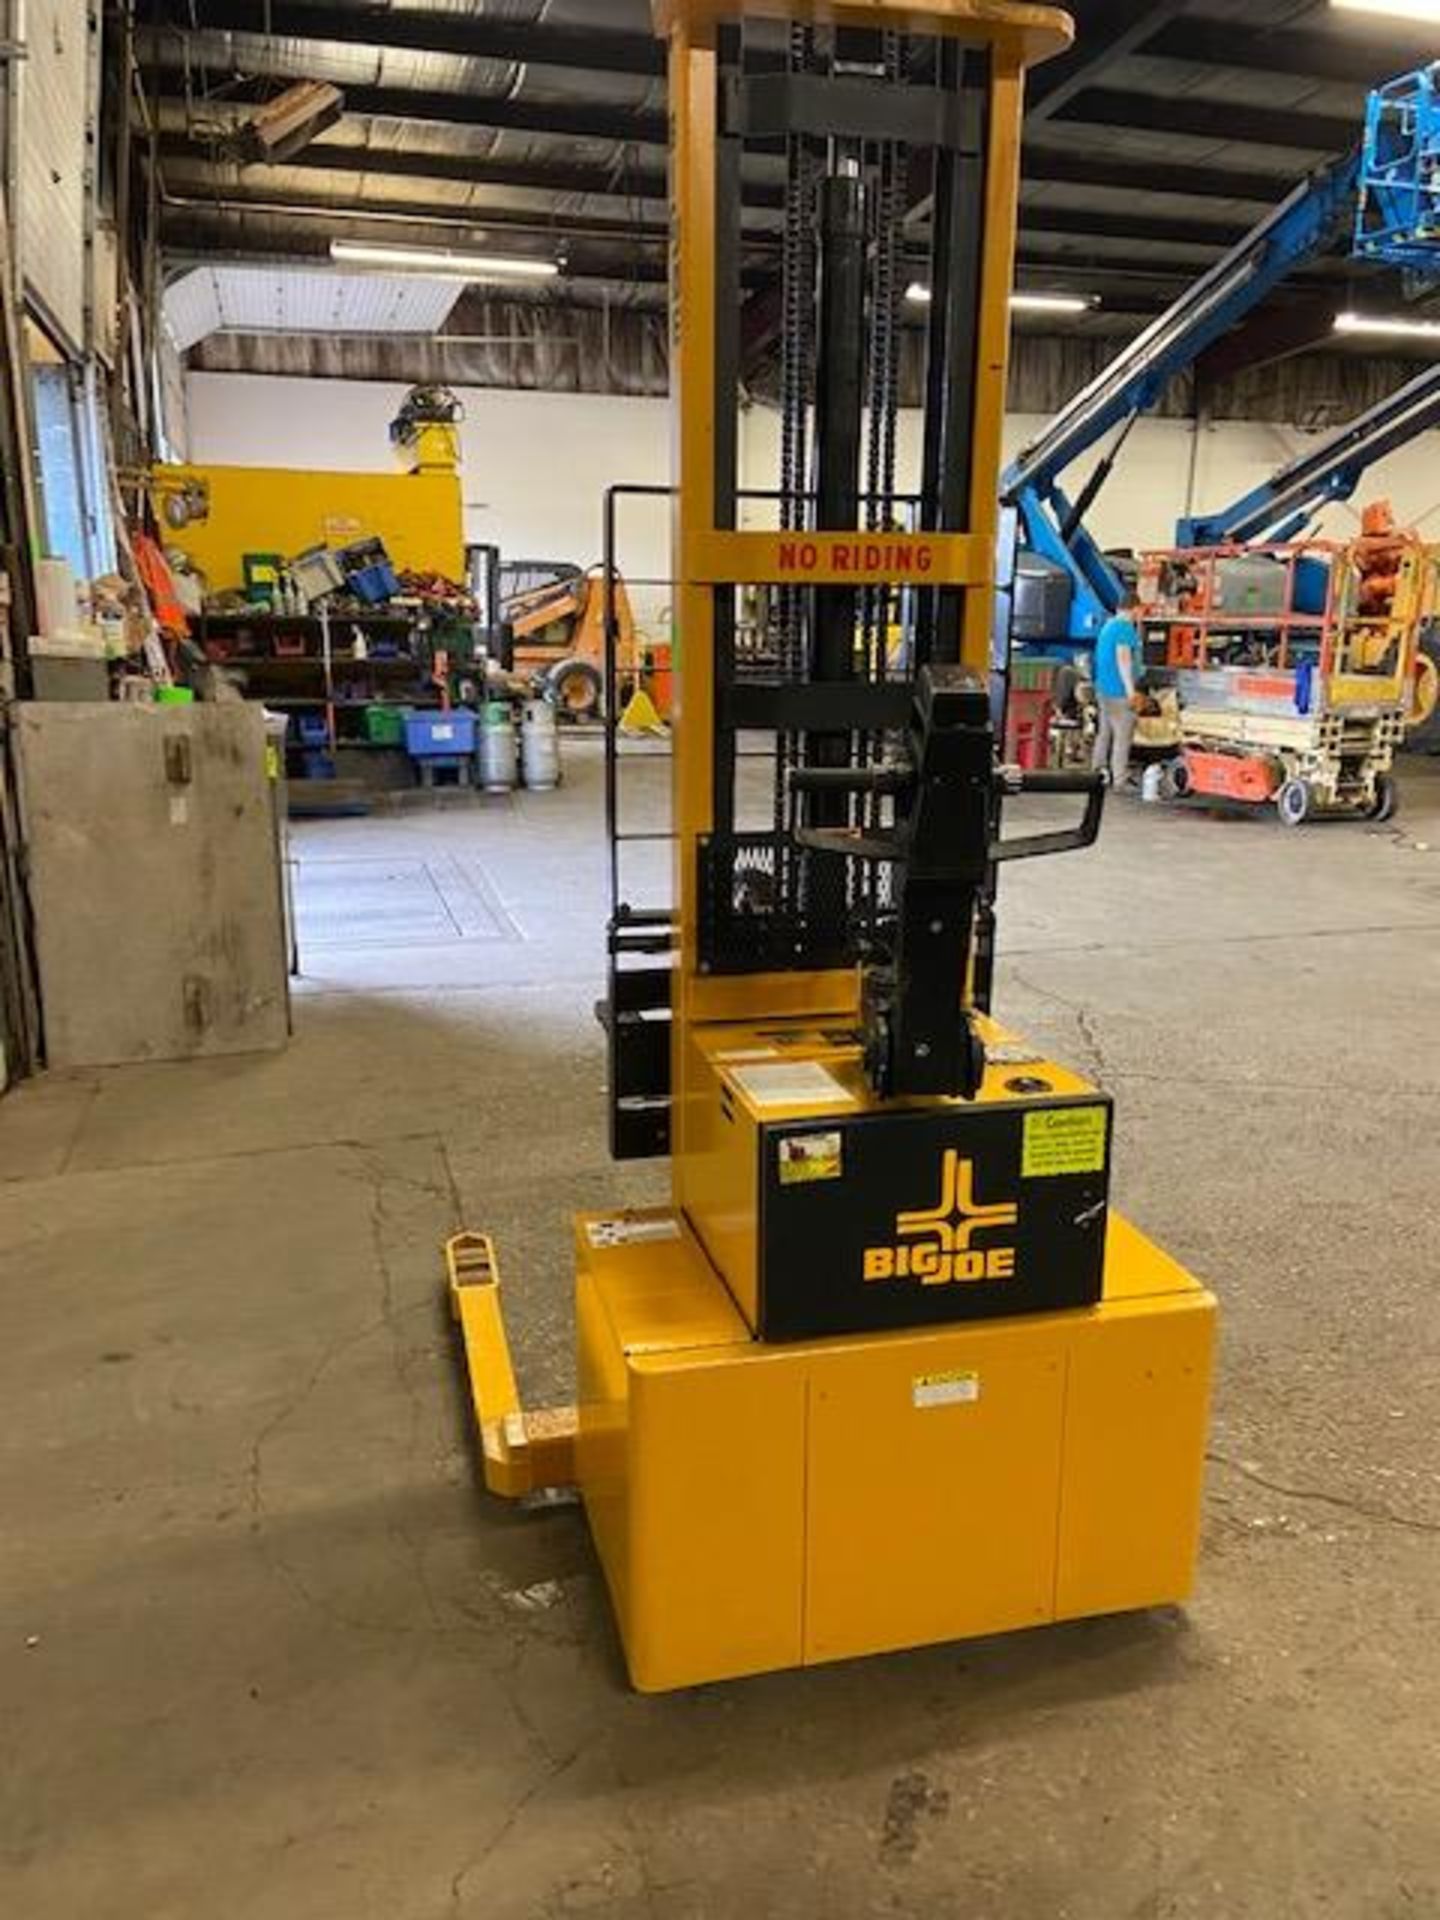 FREE CUSTOMS - Big Joe Order Picker 3000lbs capacity Electric Powered Pallet Cart Lifter EXTREMELY - Image 3 of 3